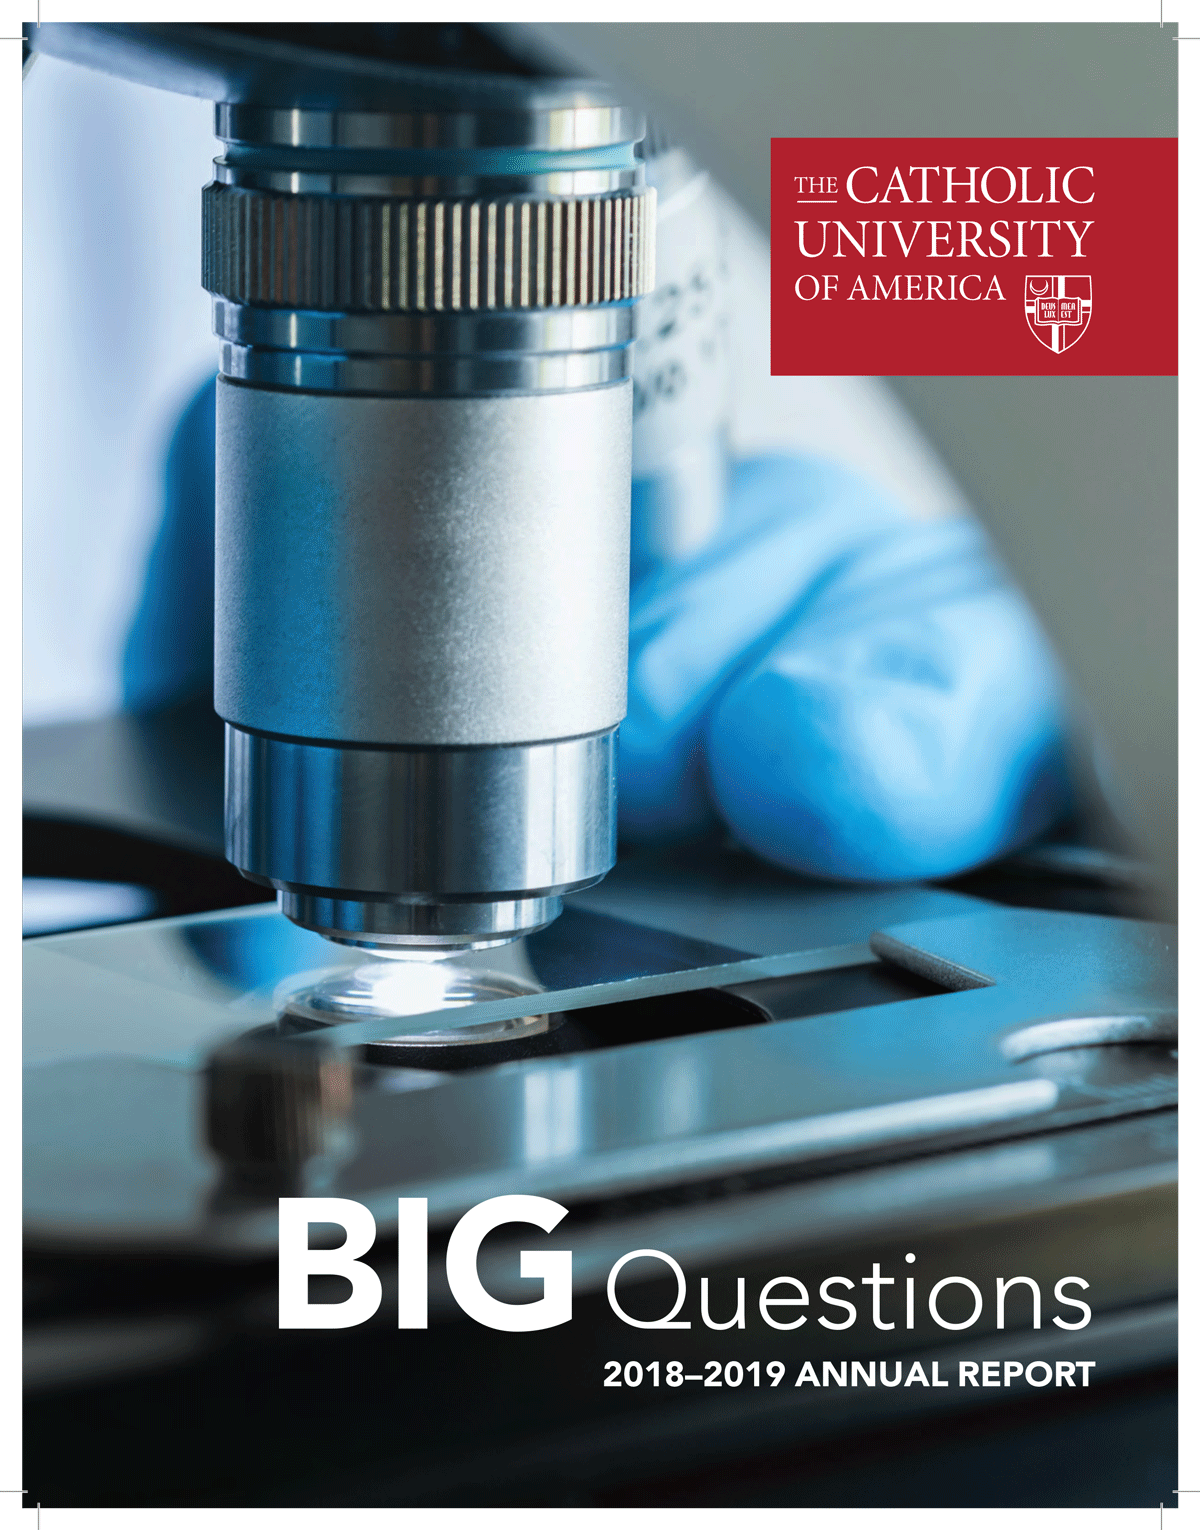 The Catholic University of America 2018-2019 Annual Report "Big Questions"